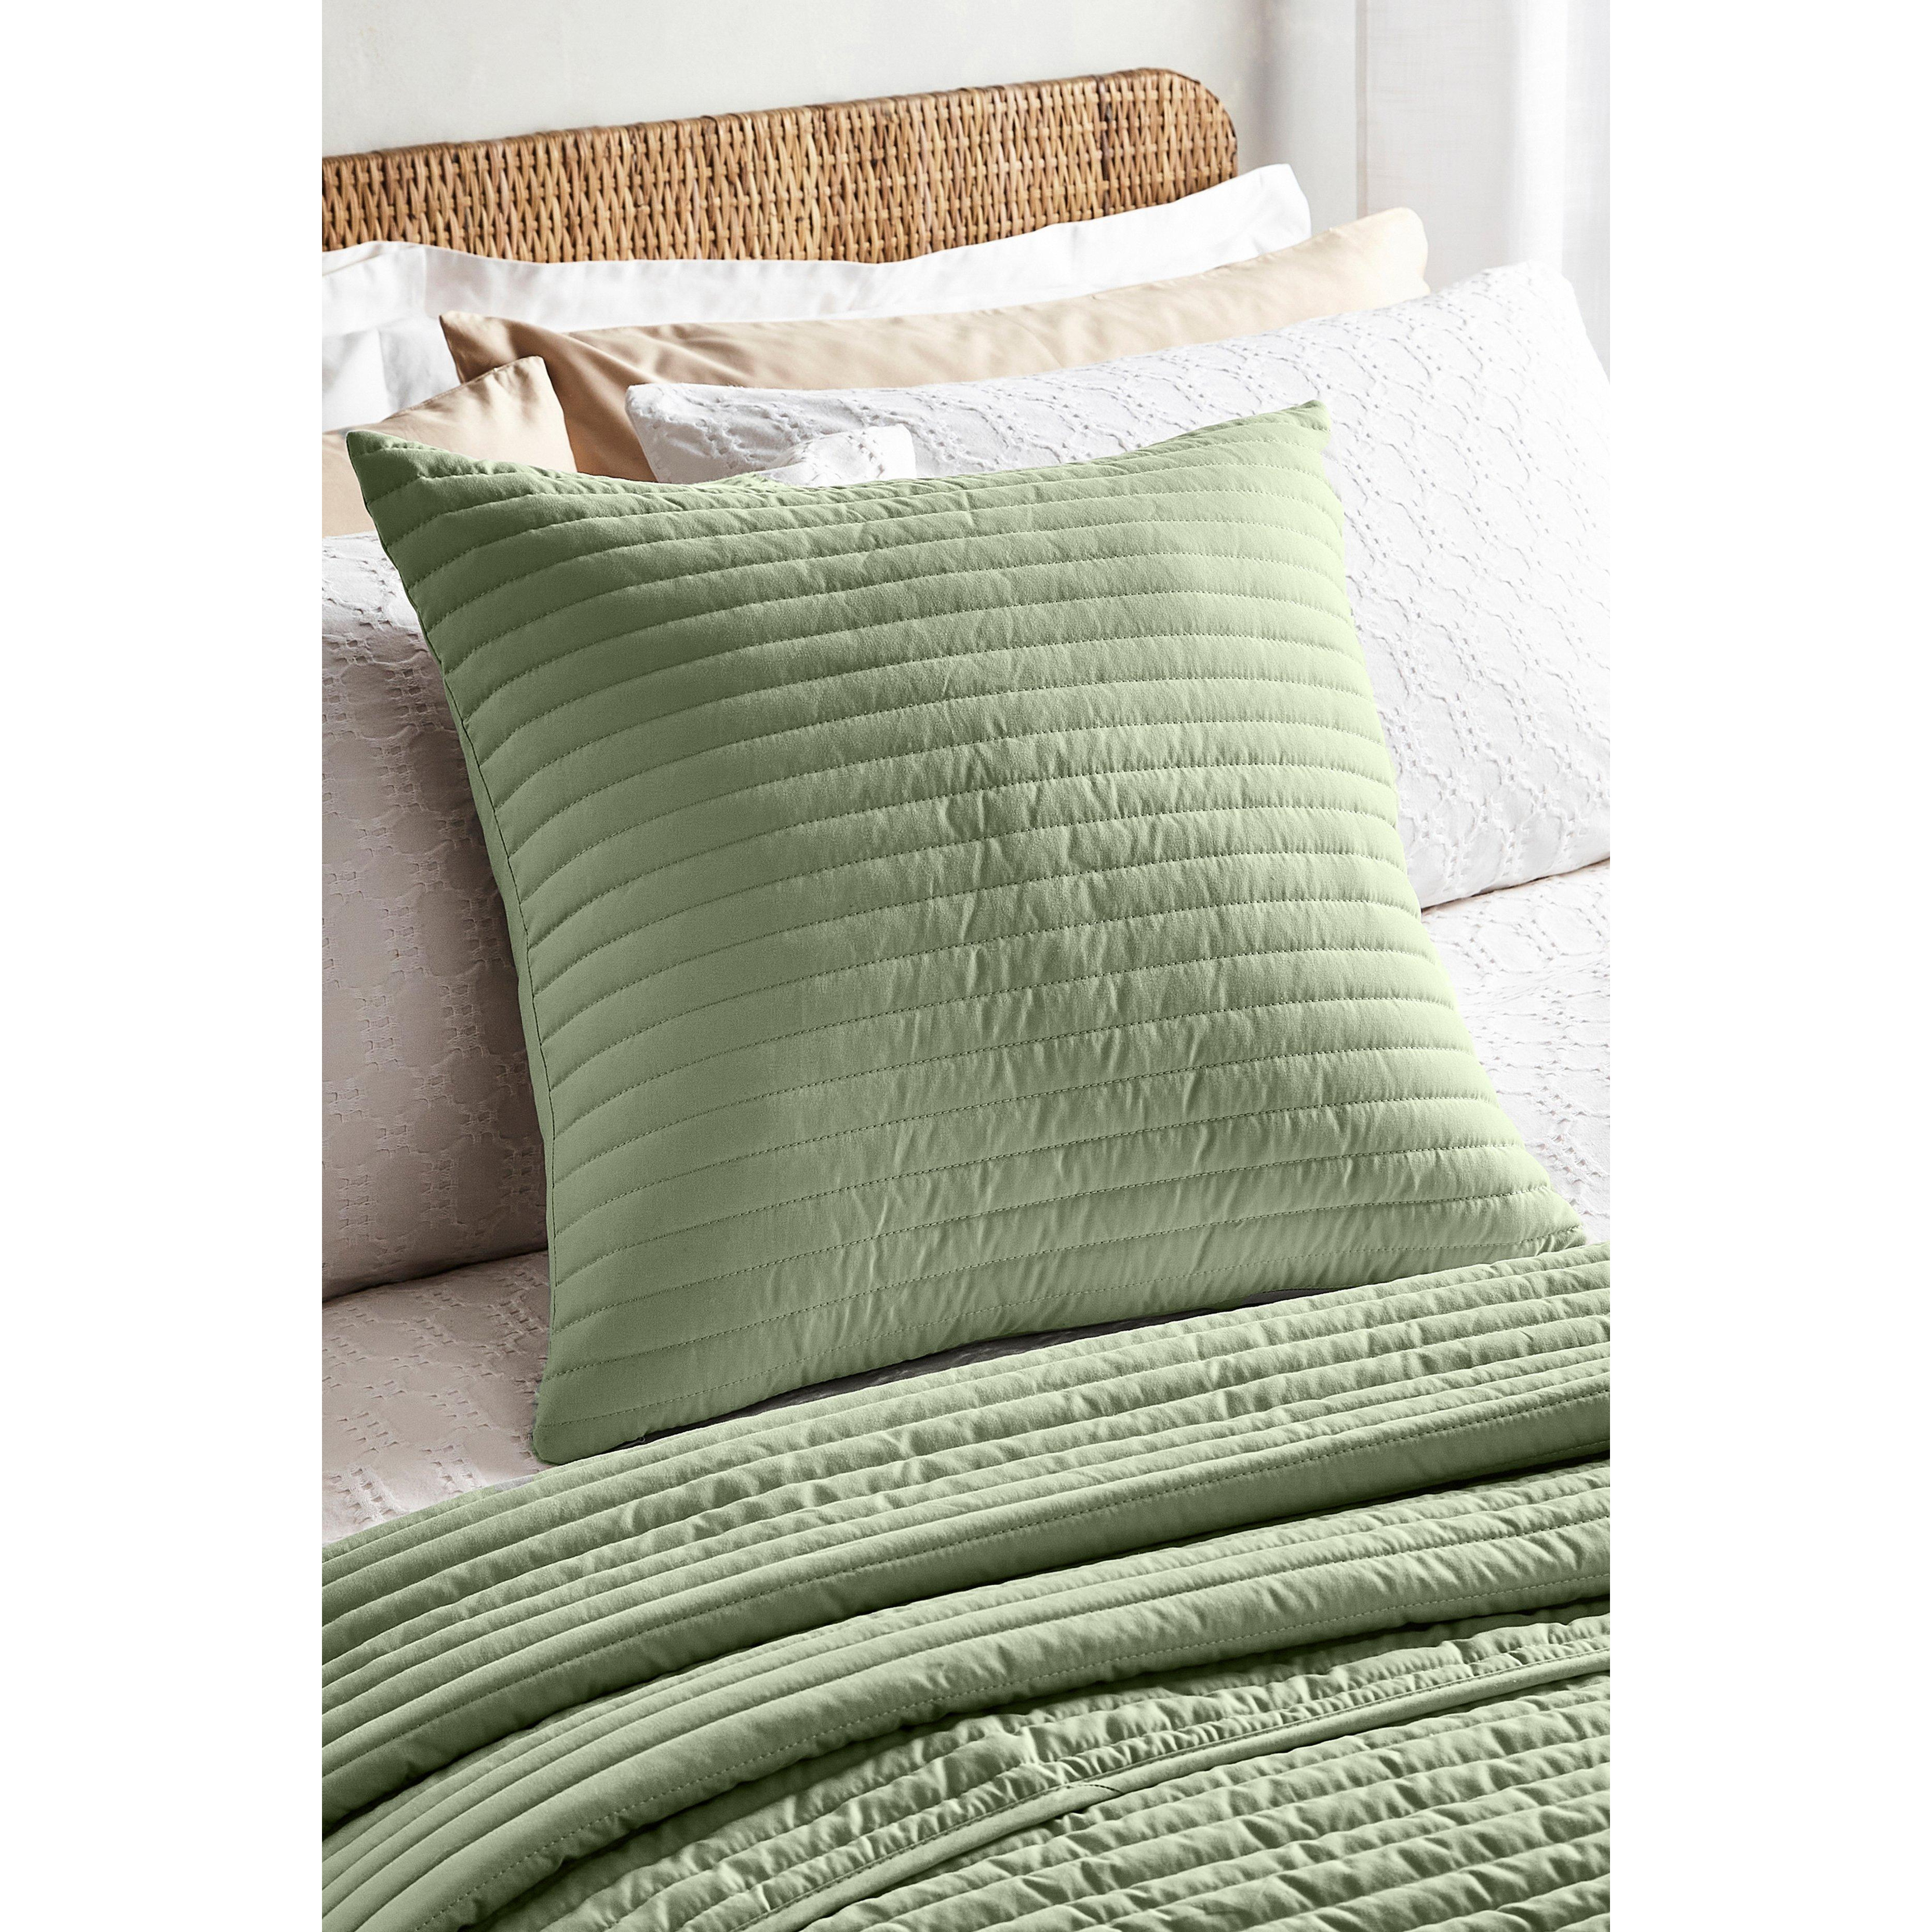 'Quilted Lines' Cushion - image 1